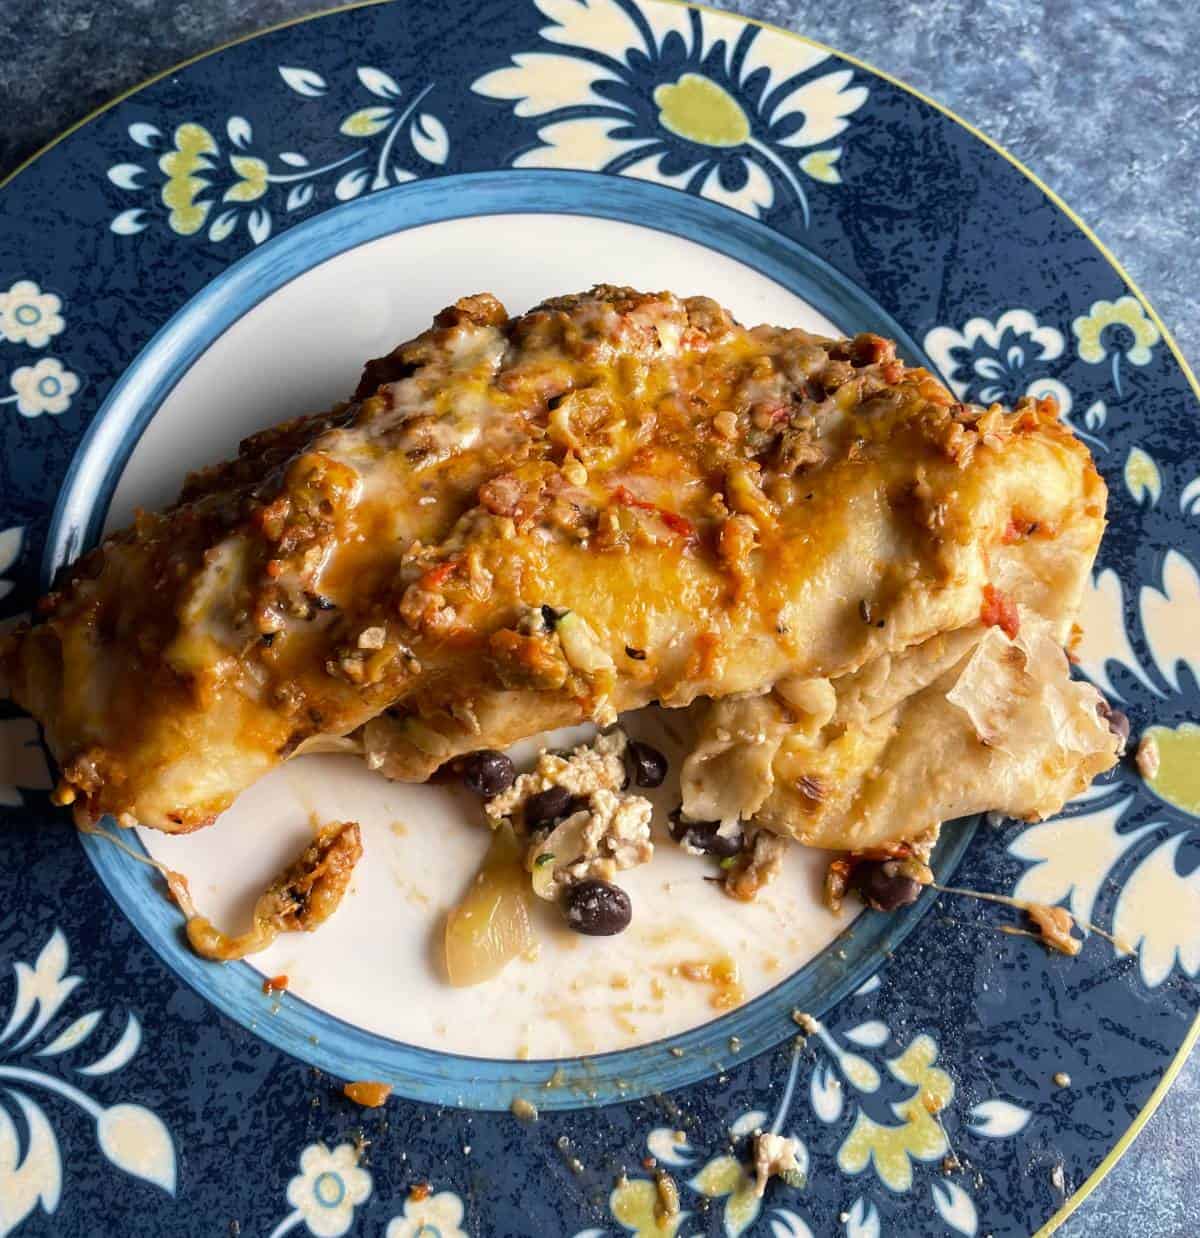 vegetarian Hatch chile enchilada served on a plate with flowers around the edges.